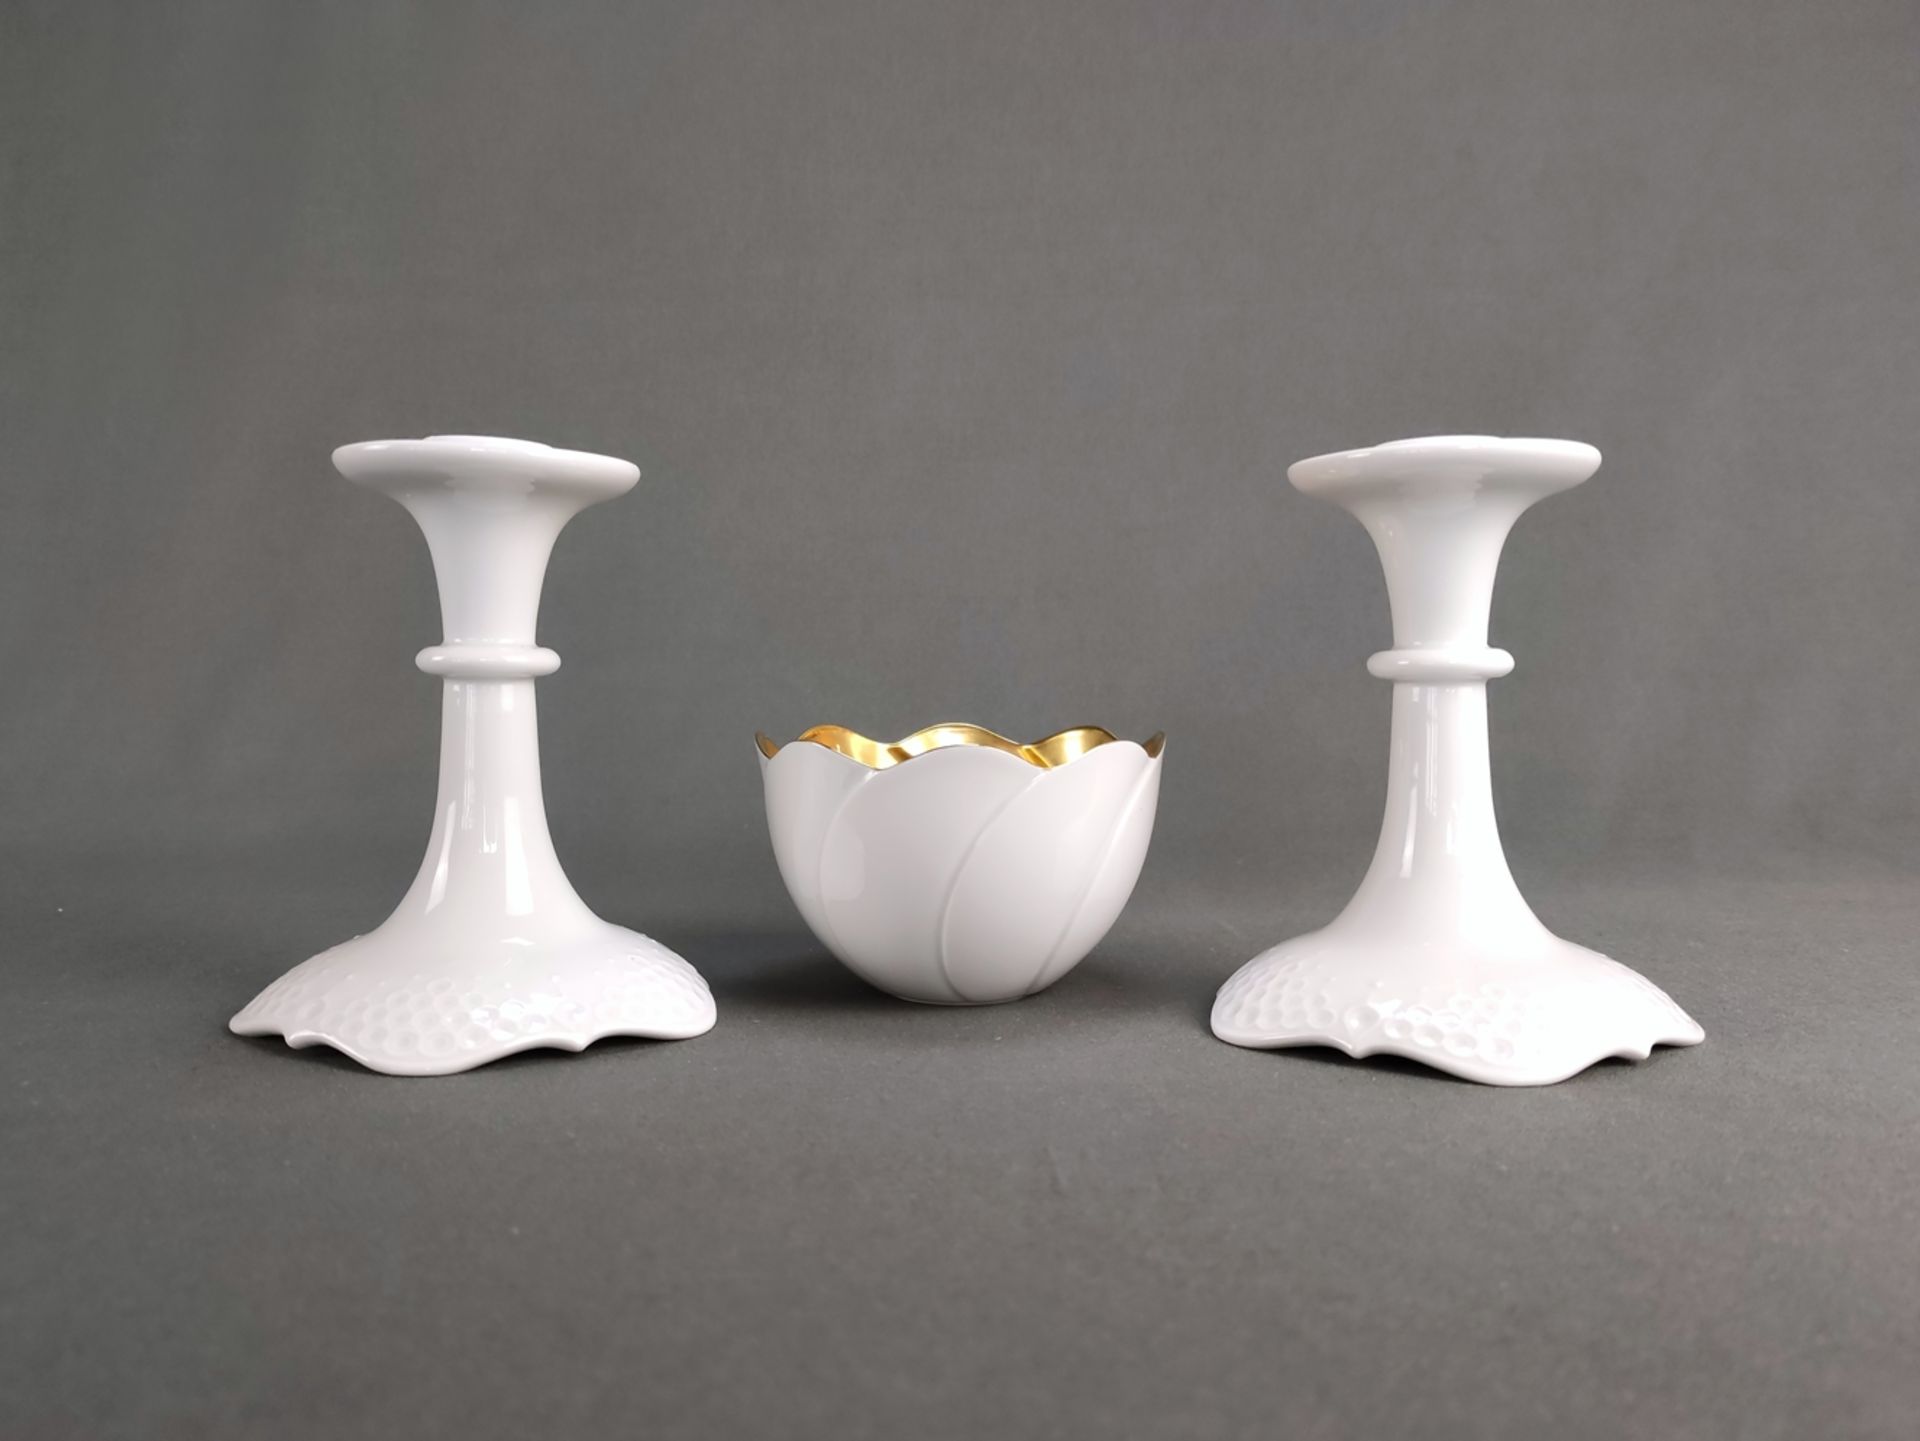 Convolute Meissen, porcelain, 1st choice, blue crossed swords mark to base, 3 pieces, consisting of